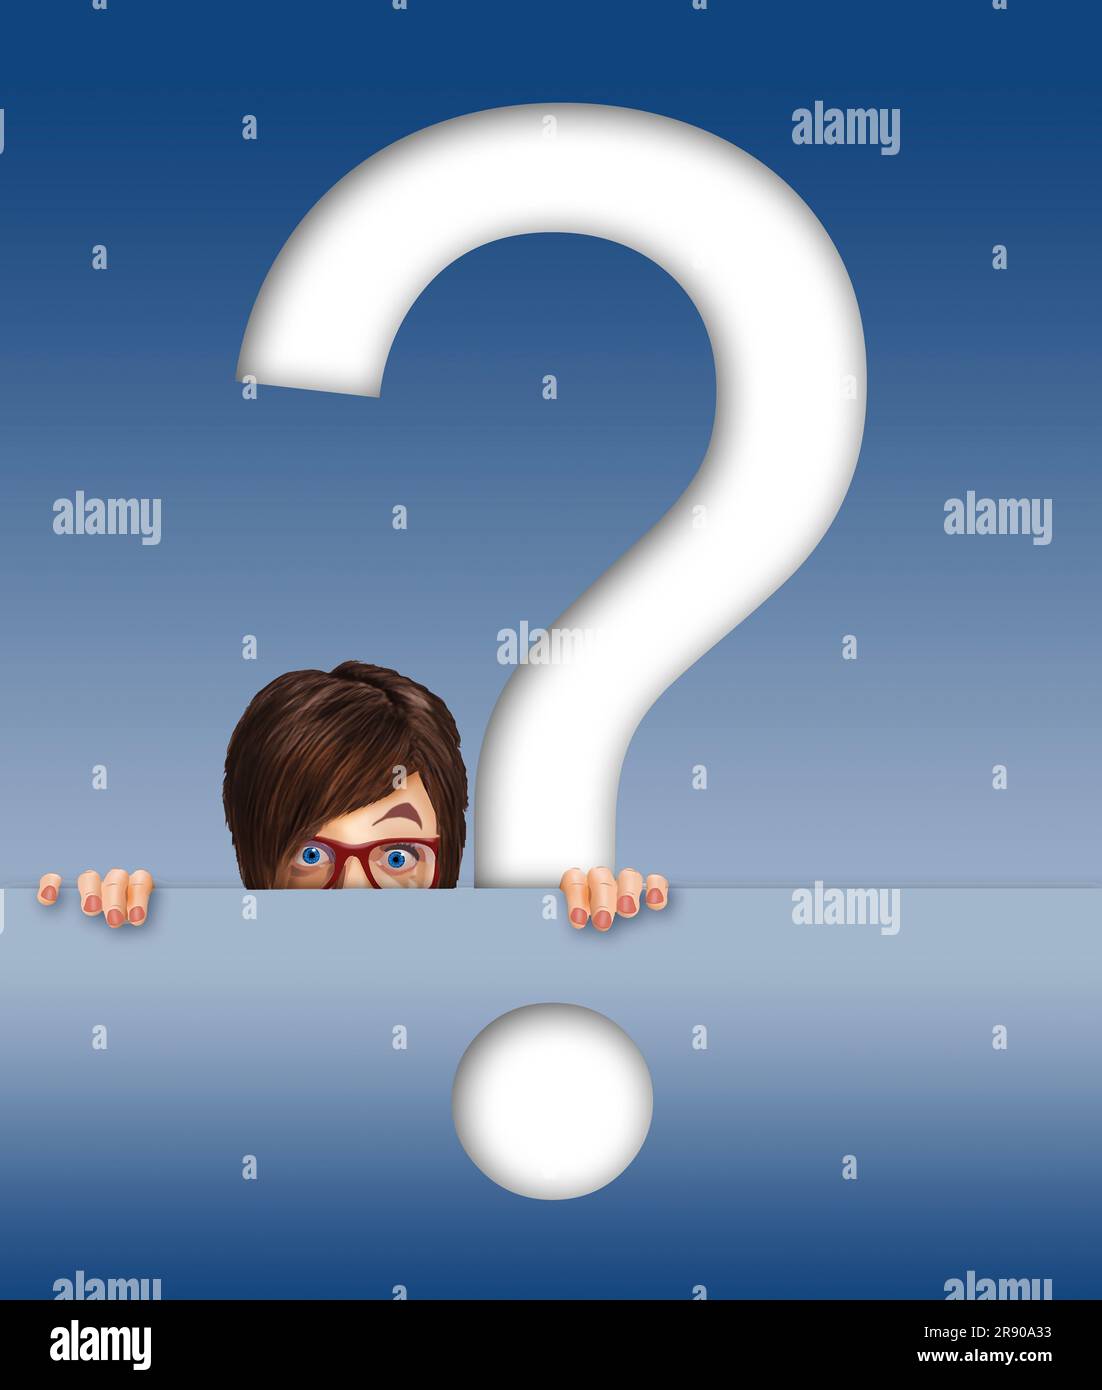 A young woman looks surprised or amazed as she is seen with a huge question mark in a 3-d illustration. Questions anyone? Stock Photo